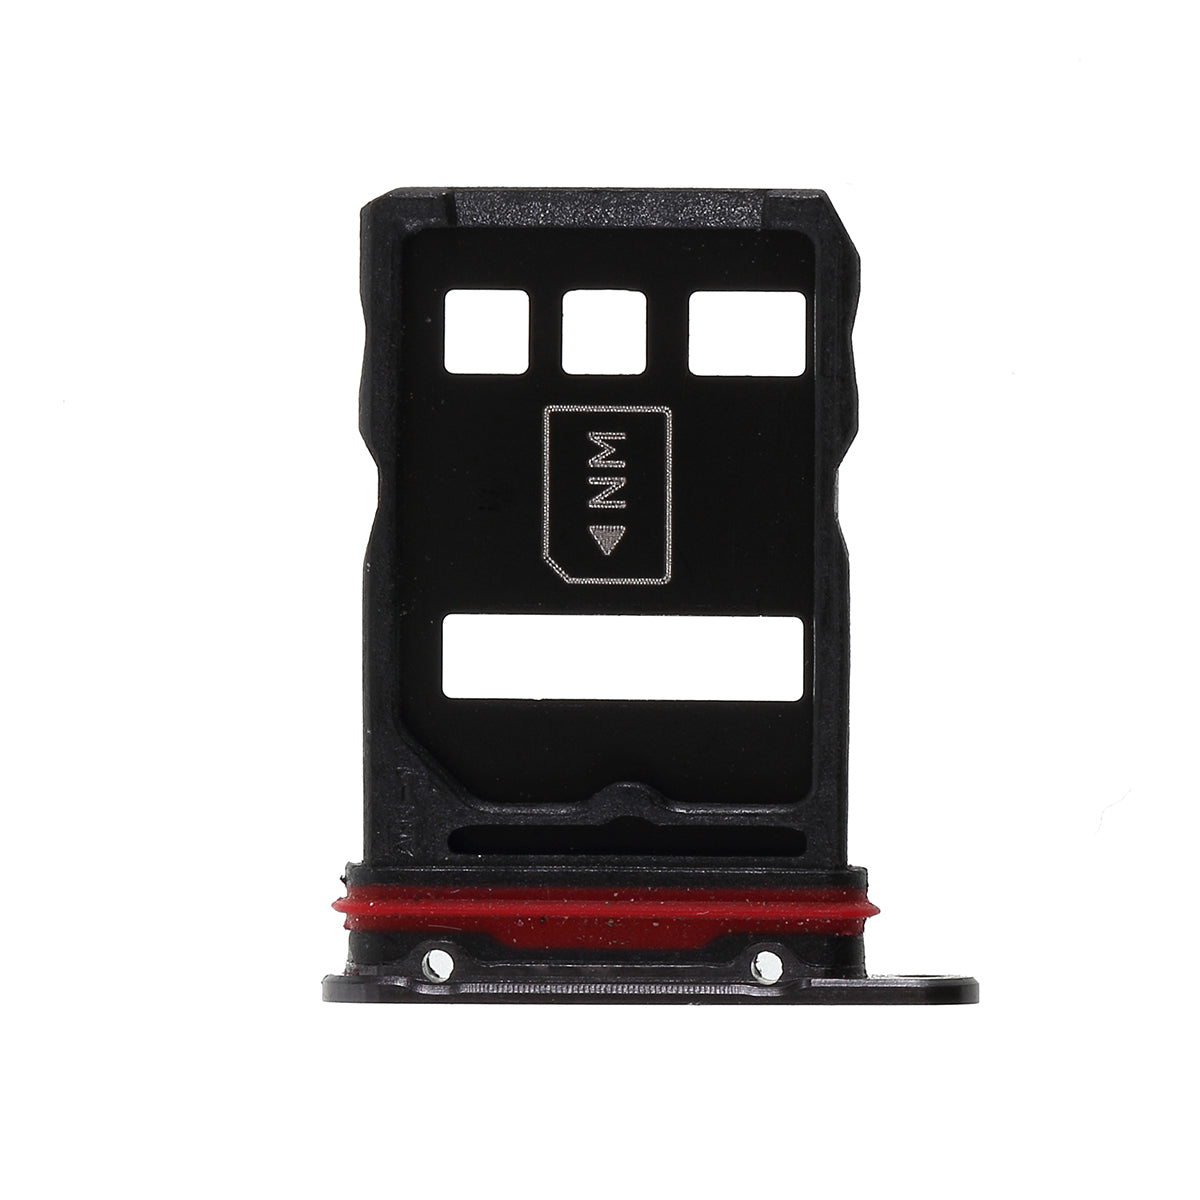 OEM SIM Card Tray Holder Replace Part for Huawei Mate 30 Pro - Black